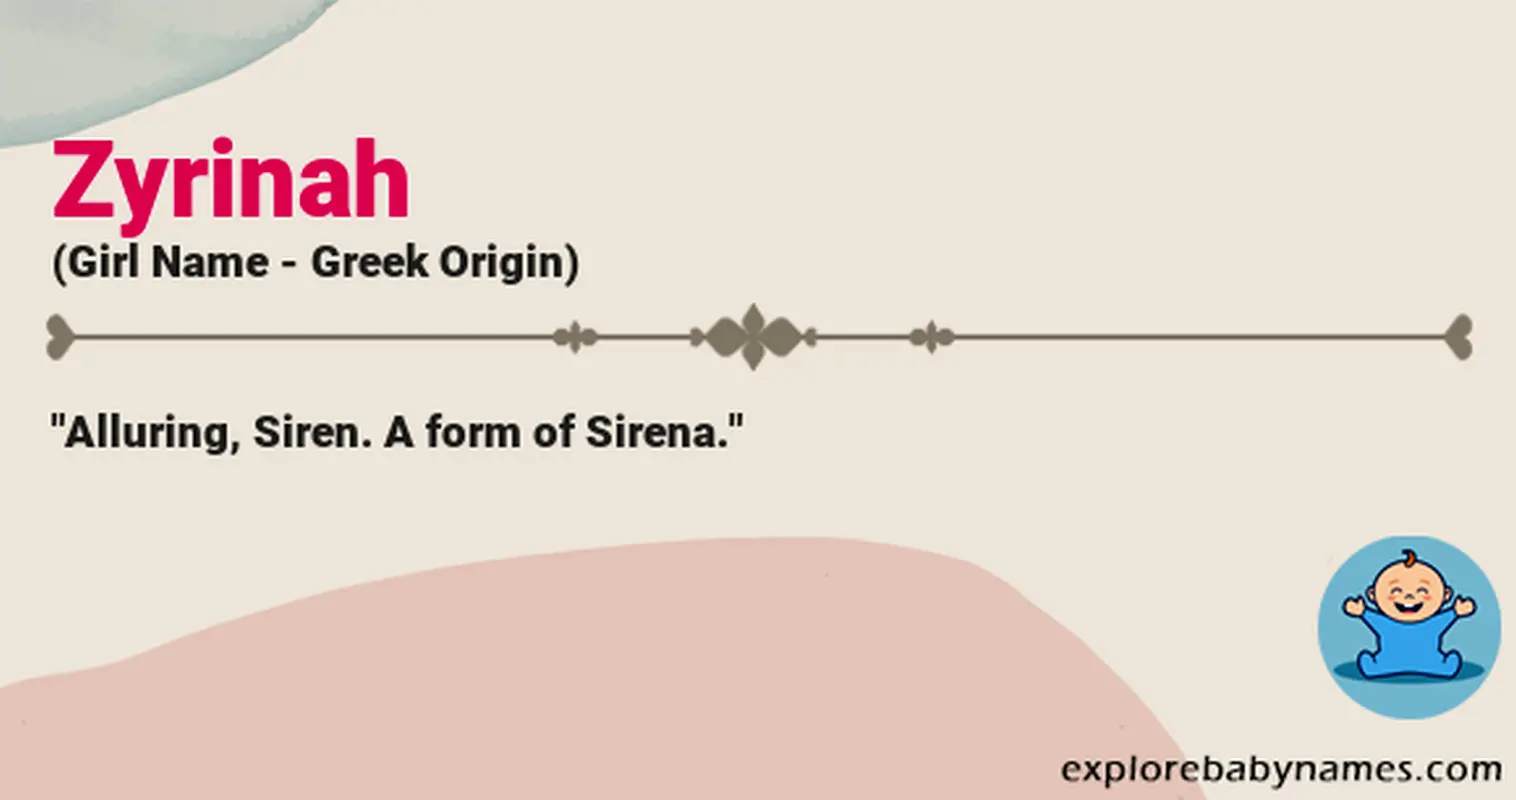 Meaning of Zyrinah